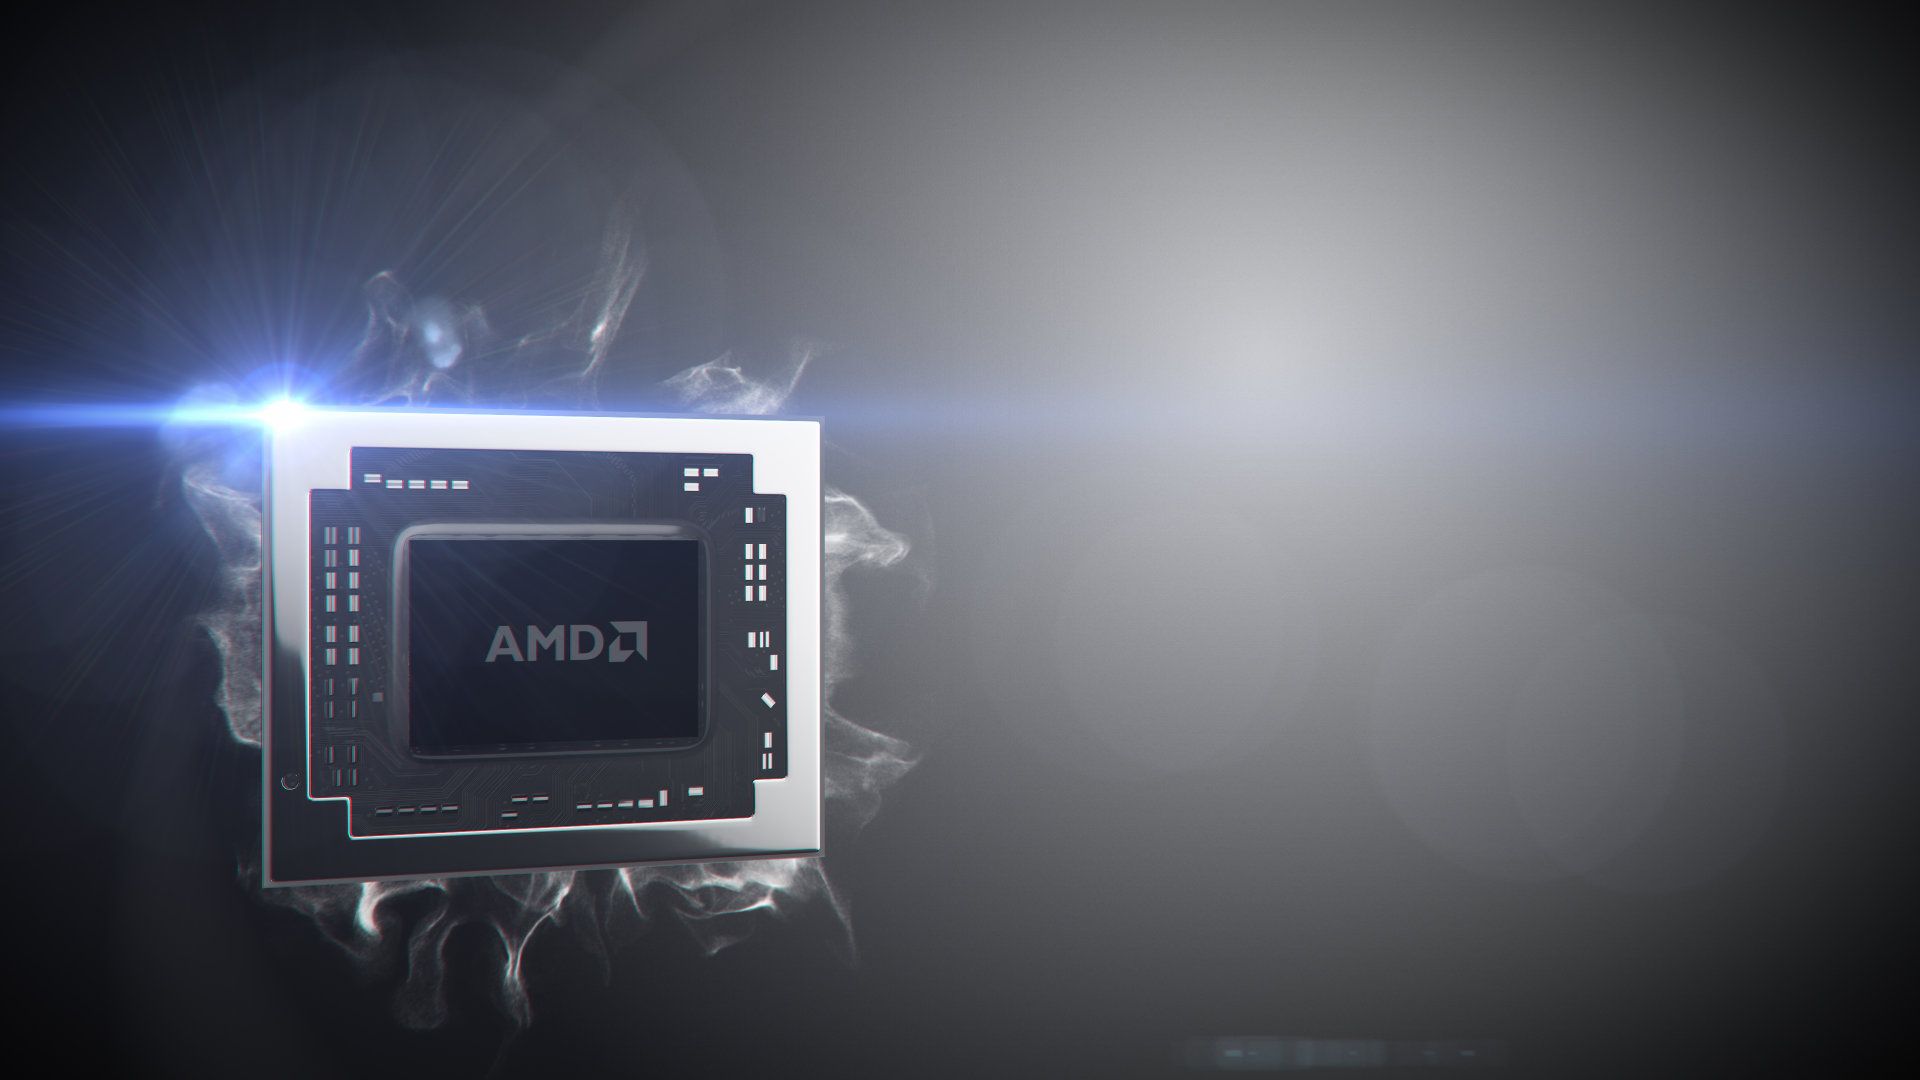 1920x1080 Amd Bristol Ridge Apu Family For Am4 And Fp4 Platforms Detailed Skus Revealed Excavator And 3rd Gen Gcn Powered Processors For Desktop And Mobile Users